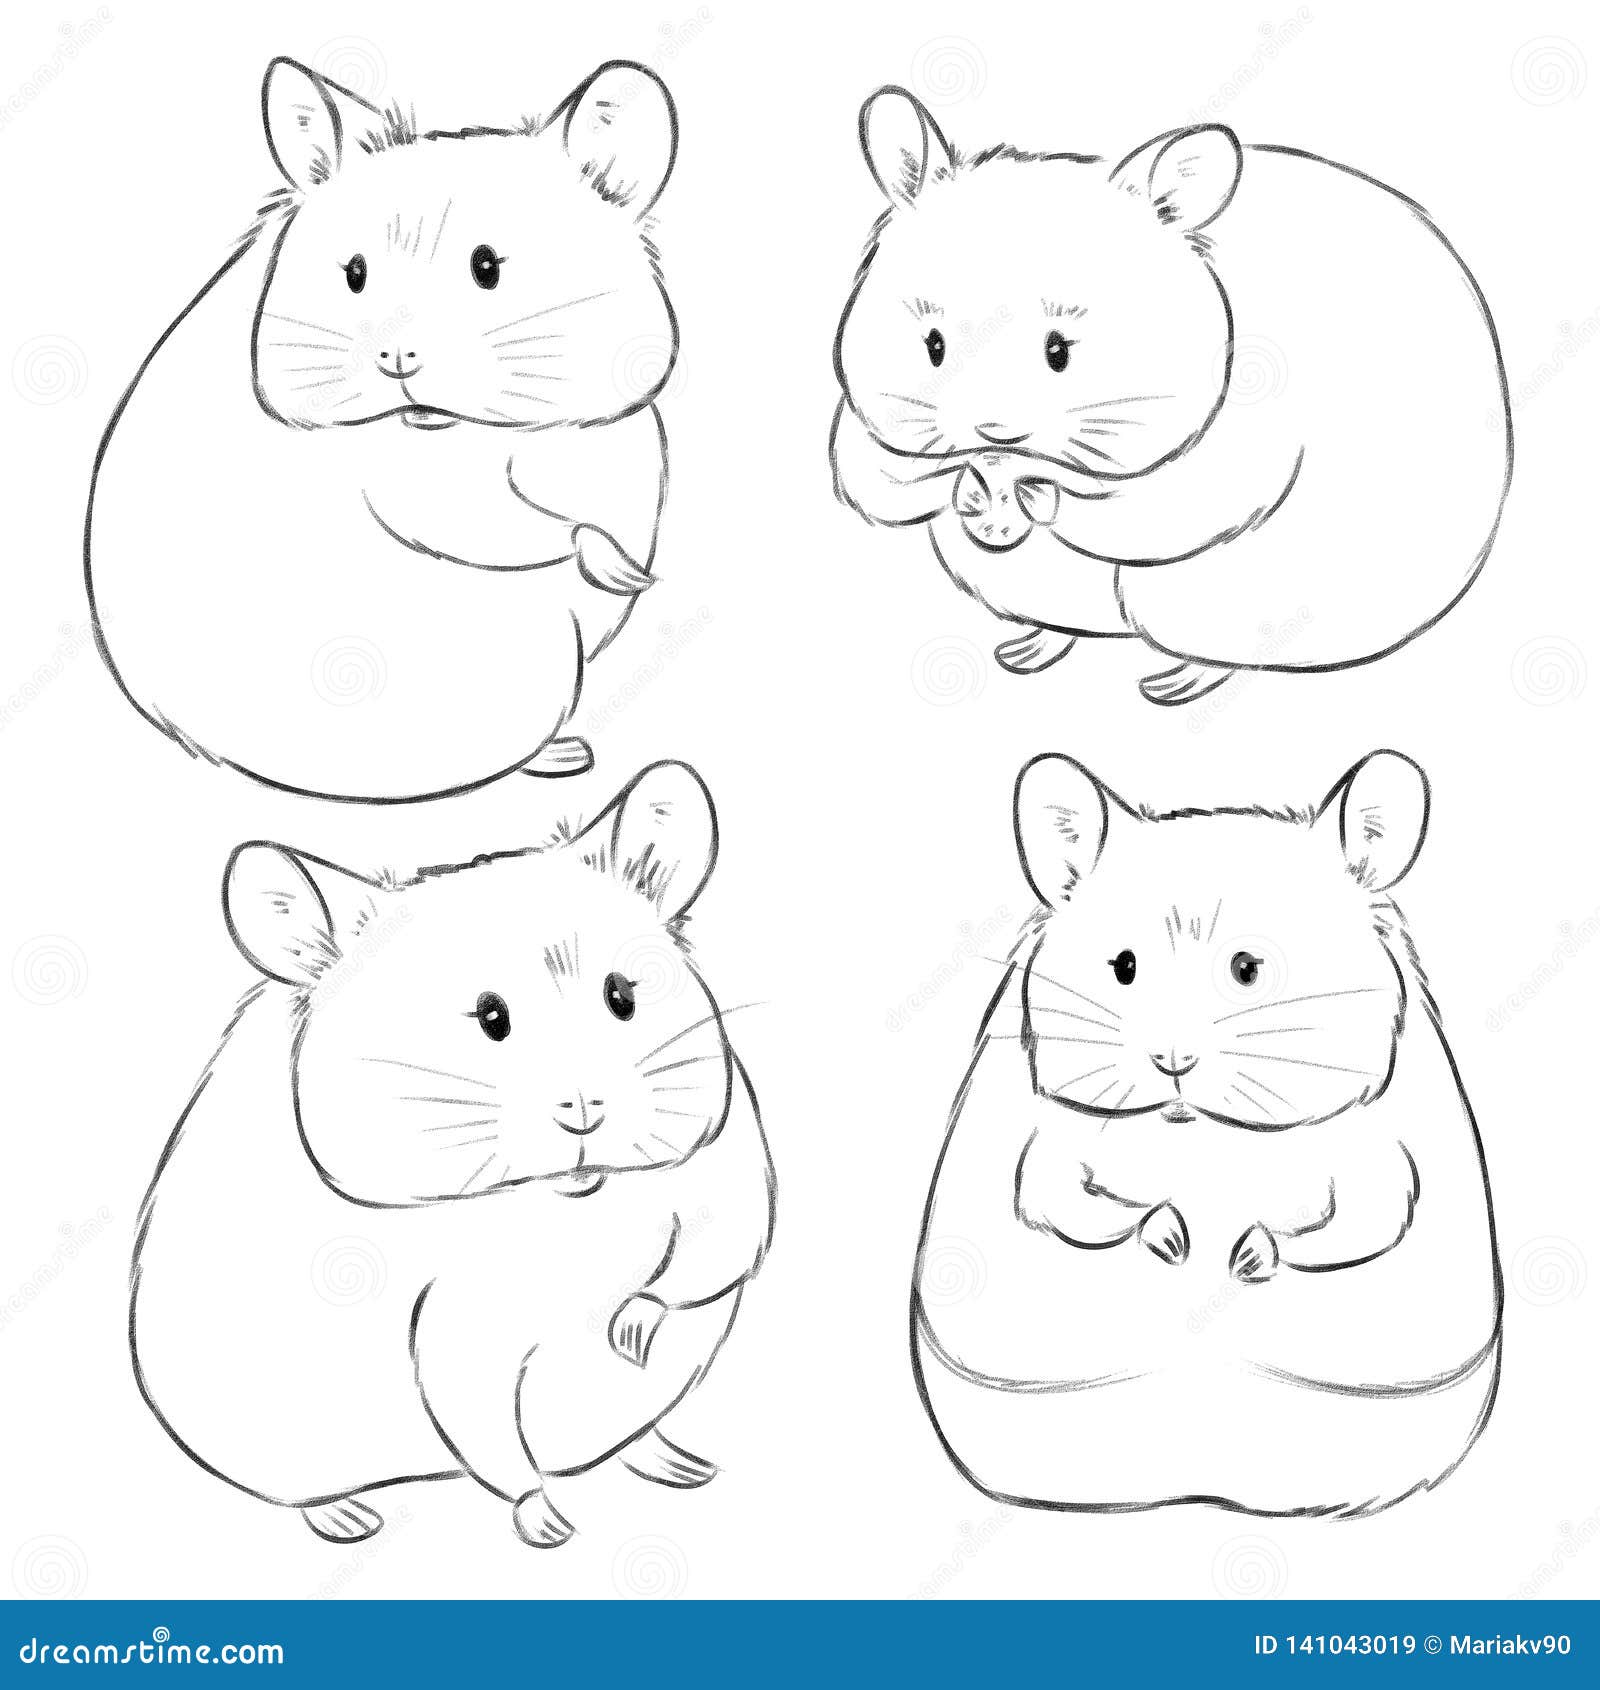 Drawn By Hand Sketches Of Cute Cartoon Hamsters On White